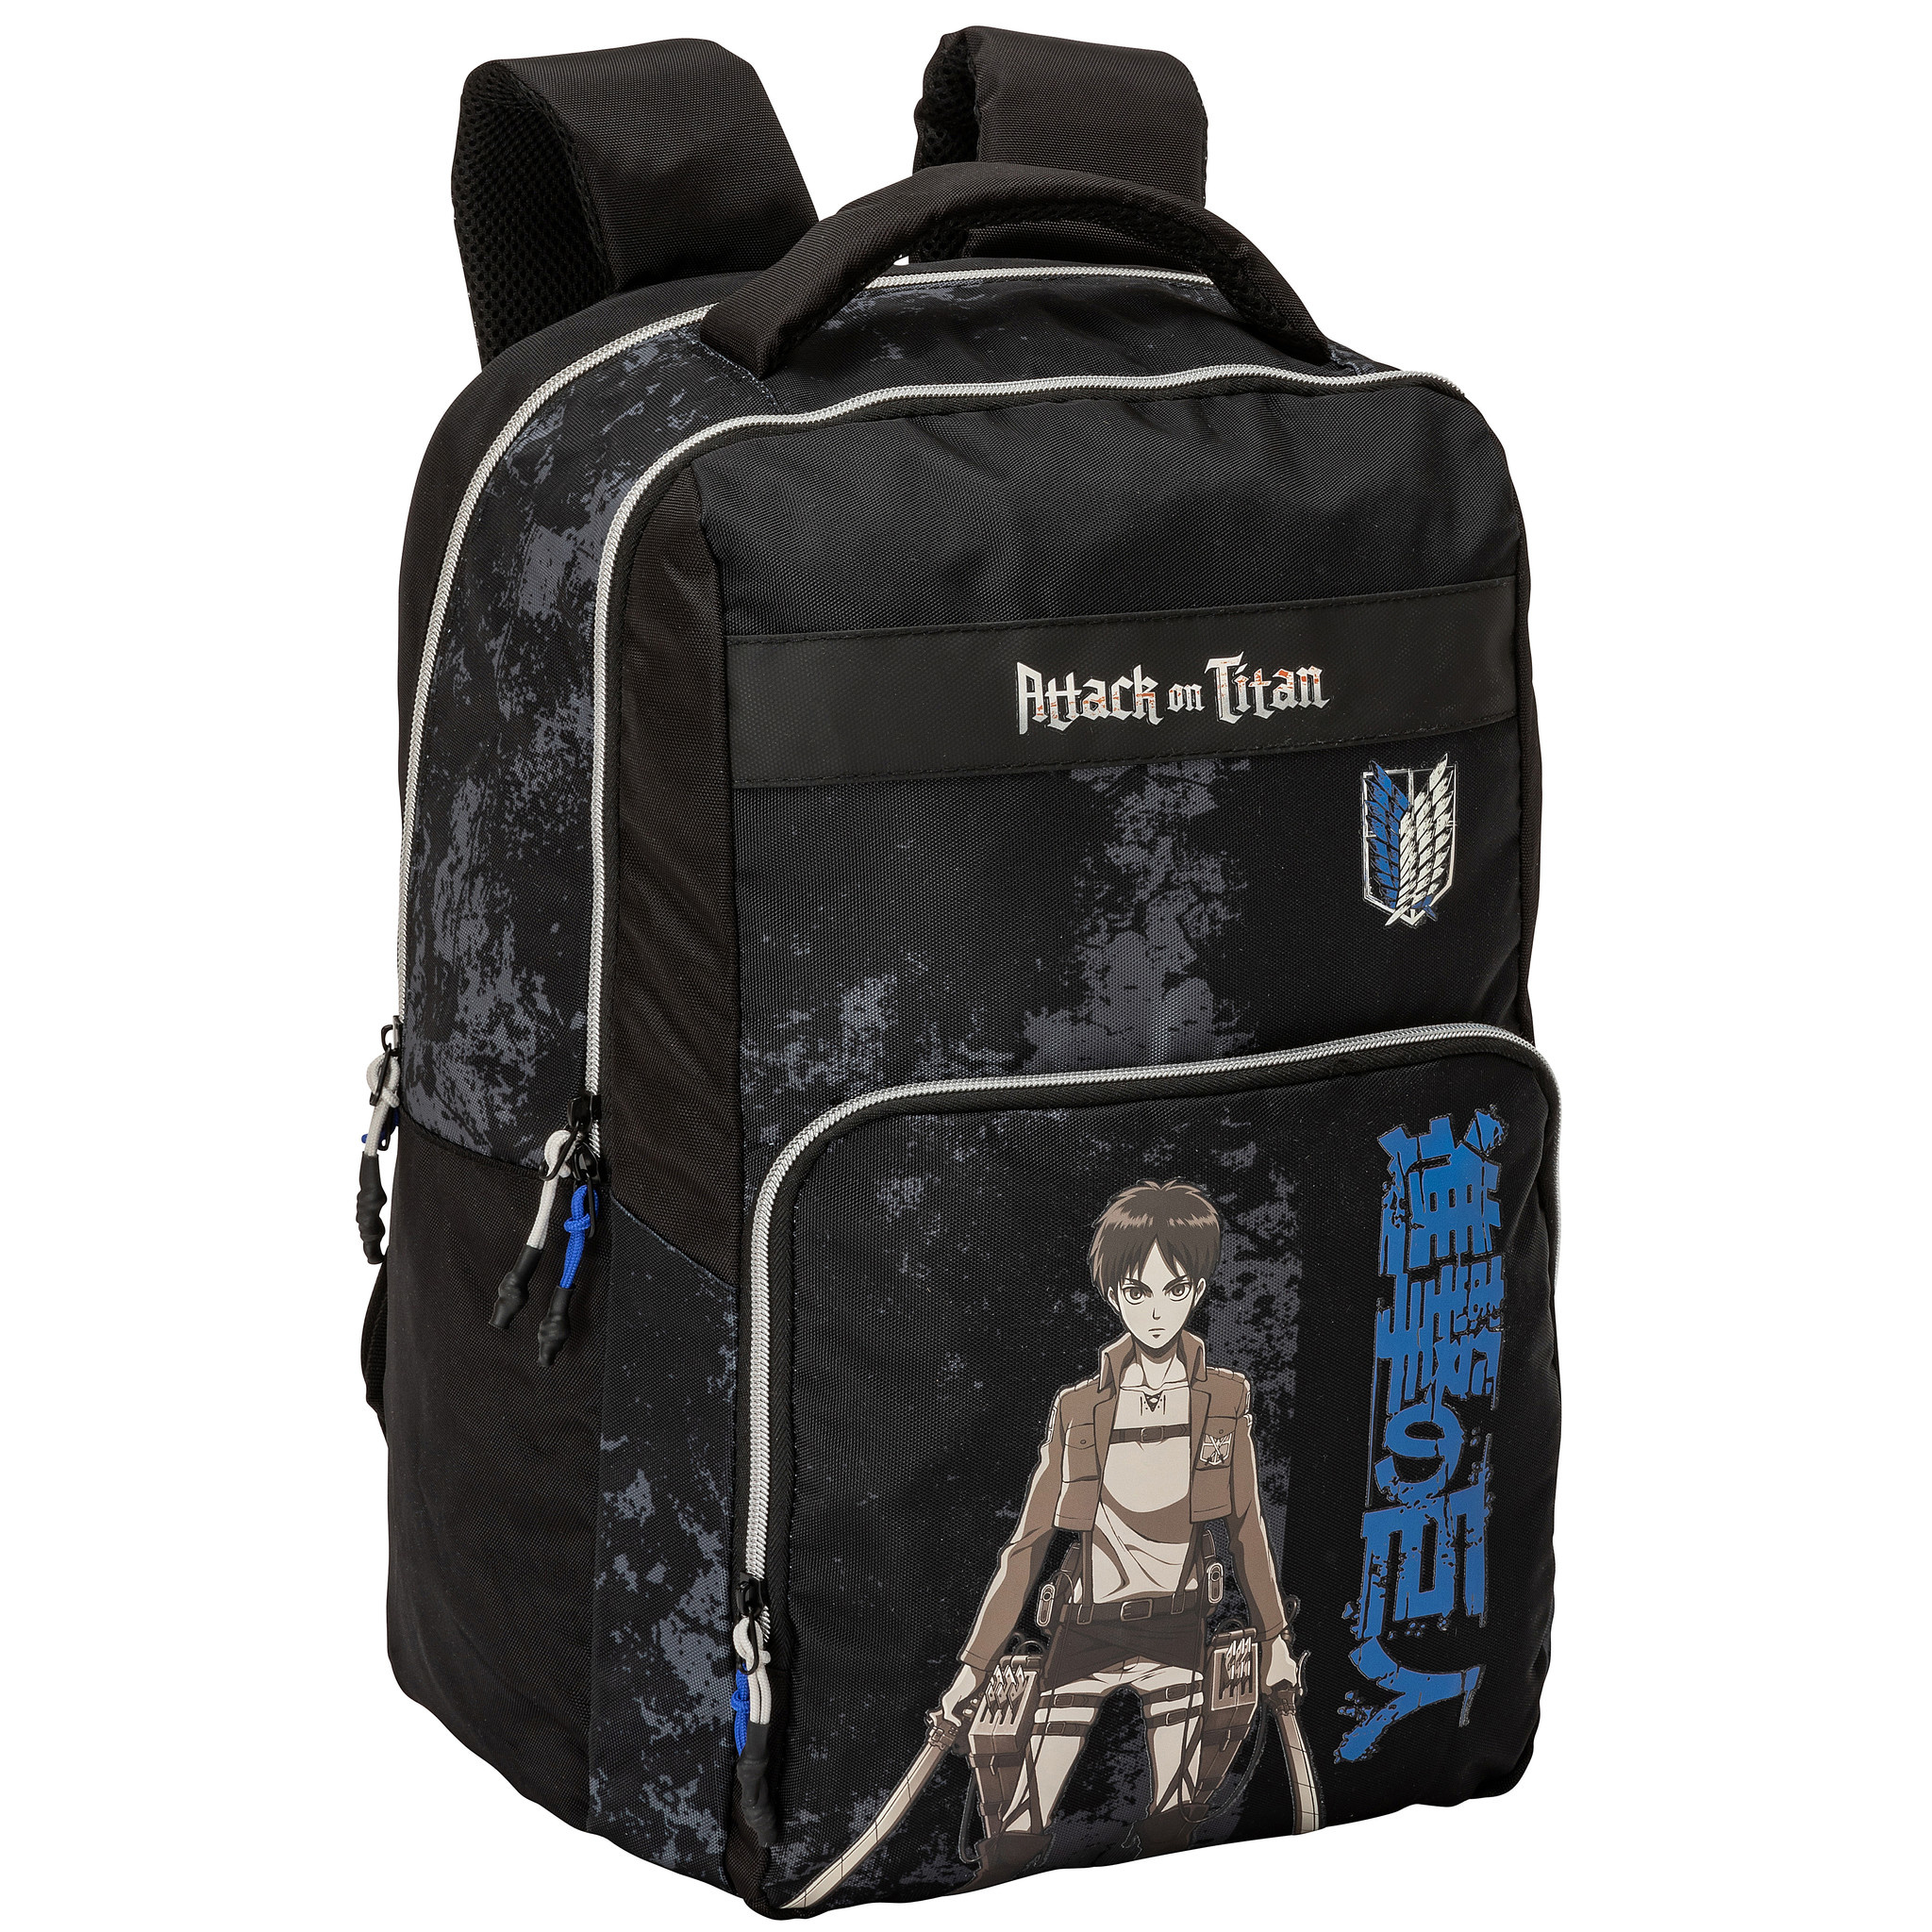 Comix Backpack Attack on Titan - 43 x 34 x 23 cm - Polyester